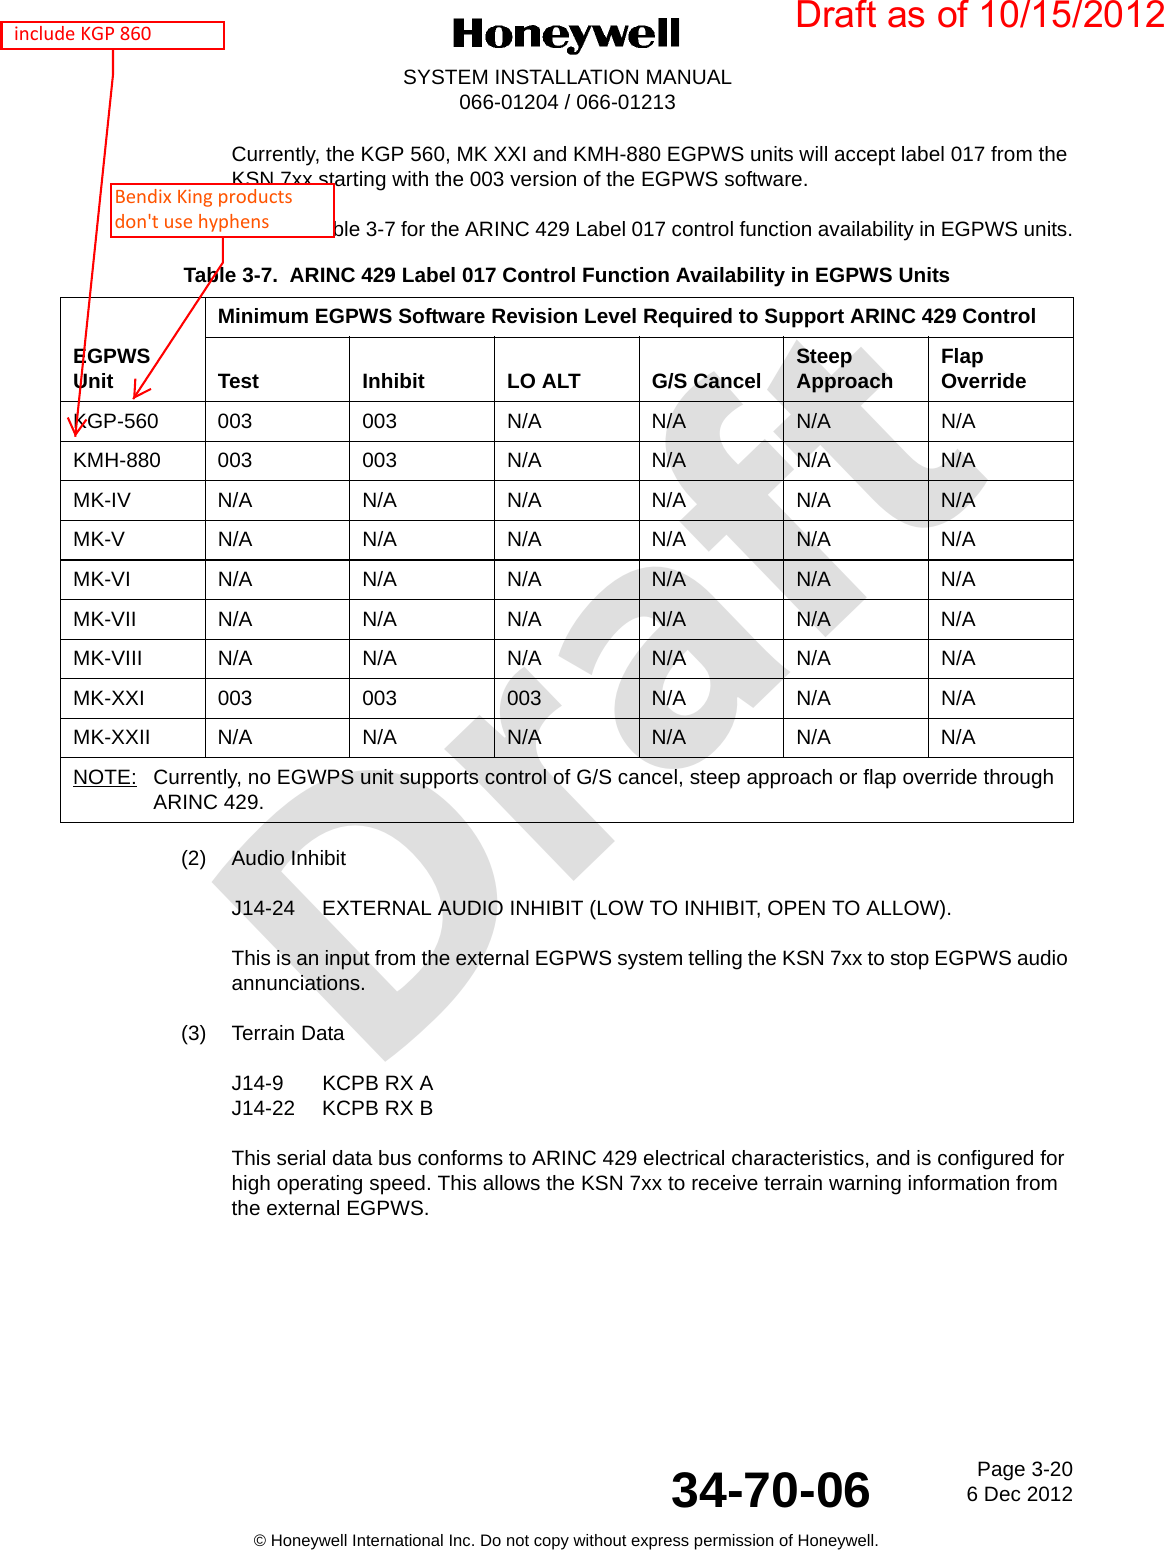 DraftPage 3-206 Dec 201234-70-06SYSTEM INSTALLATION MANUAL066-01204 / 066-01213© Honeywell International Inc. Do not copy without express permission of Honeywell.Currently, the KGP 560, MK XXI and KMH-880 EGPWS units will accept label 017 from the KSN 7xx starting with the 003 version of the EGPWS software.Refer to Table 3-7 for the ARINC 429 Label 017 control function availability in EGPWS units.(2) Audio InhibitJ14-24 EXTERNAL AUDIO INHIBIT (LOW TO INHIBIT, OPEN TO ALLOW).This is an input from the external EGPWS system telling the KSN 7xx to stop EGPWS audio annunciations.(3) Terrain DataJ14-9 KCPB RX AJ14-22 KCPB RX BThis serial data bus conforms to ARINC 429 electrical characteristics, and is configured for high operating speed. This allows the KSN 7xx to receive terrain warning information from the external EGPWS.Table 3-7.  ARINC 429 Label 017 Control Function Availability in EGPWS UnitsEGPWS UnitMinimum EGPWS Software Revision Level Required to Support ARINC 429 ControlTest Inhibit LO ALT G/S Cancel Steep Approach Flap OverrideKGP-560 003 003 N/A N/A N/A N/AKMH-880 003 003 N/A N/A N/A N/AMK-IVN/AN/AN/AN/AN/AN/AMK-VN/AN/AN/AN/AN/AN/AMK-VIN/AN/AN/AN/AN/AN/AMK-VIIN/AN/AN/AN/AN/AN/AMK-VIII N/A N/A N/A N/A N/A N/AMK-XXI 003 003 003 N/A N/A N/AMK-XXIIN/AN/AN/AN/AN/AN/ANOTE: Currently, no EGWPS unit supports control of G/S cancel, steep approach or flap override through ARINC 429.Draft as of 10/15/2012  include KGP 860Bendix King products don&apos;t use hyphens